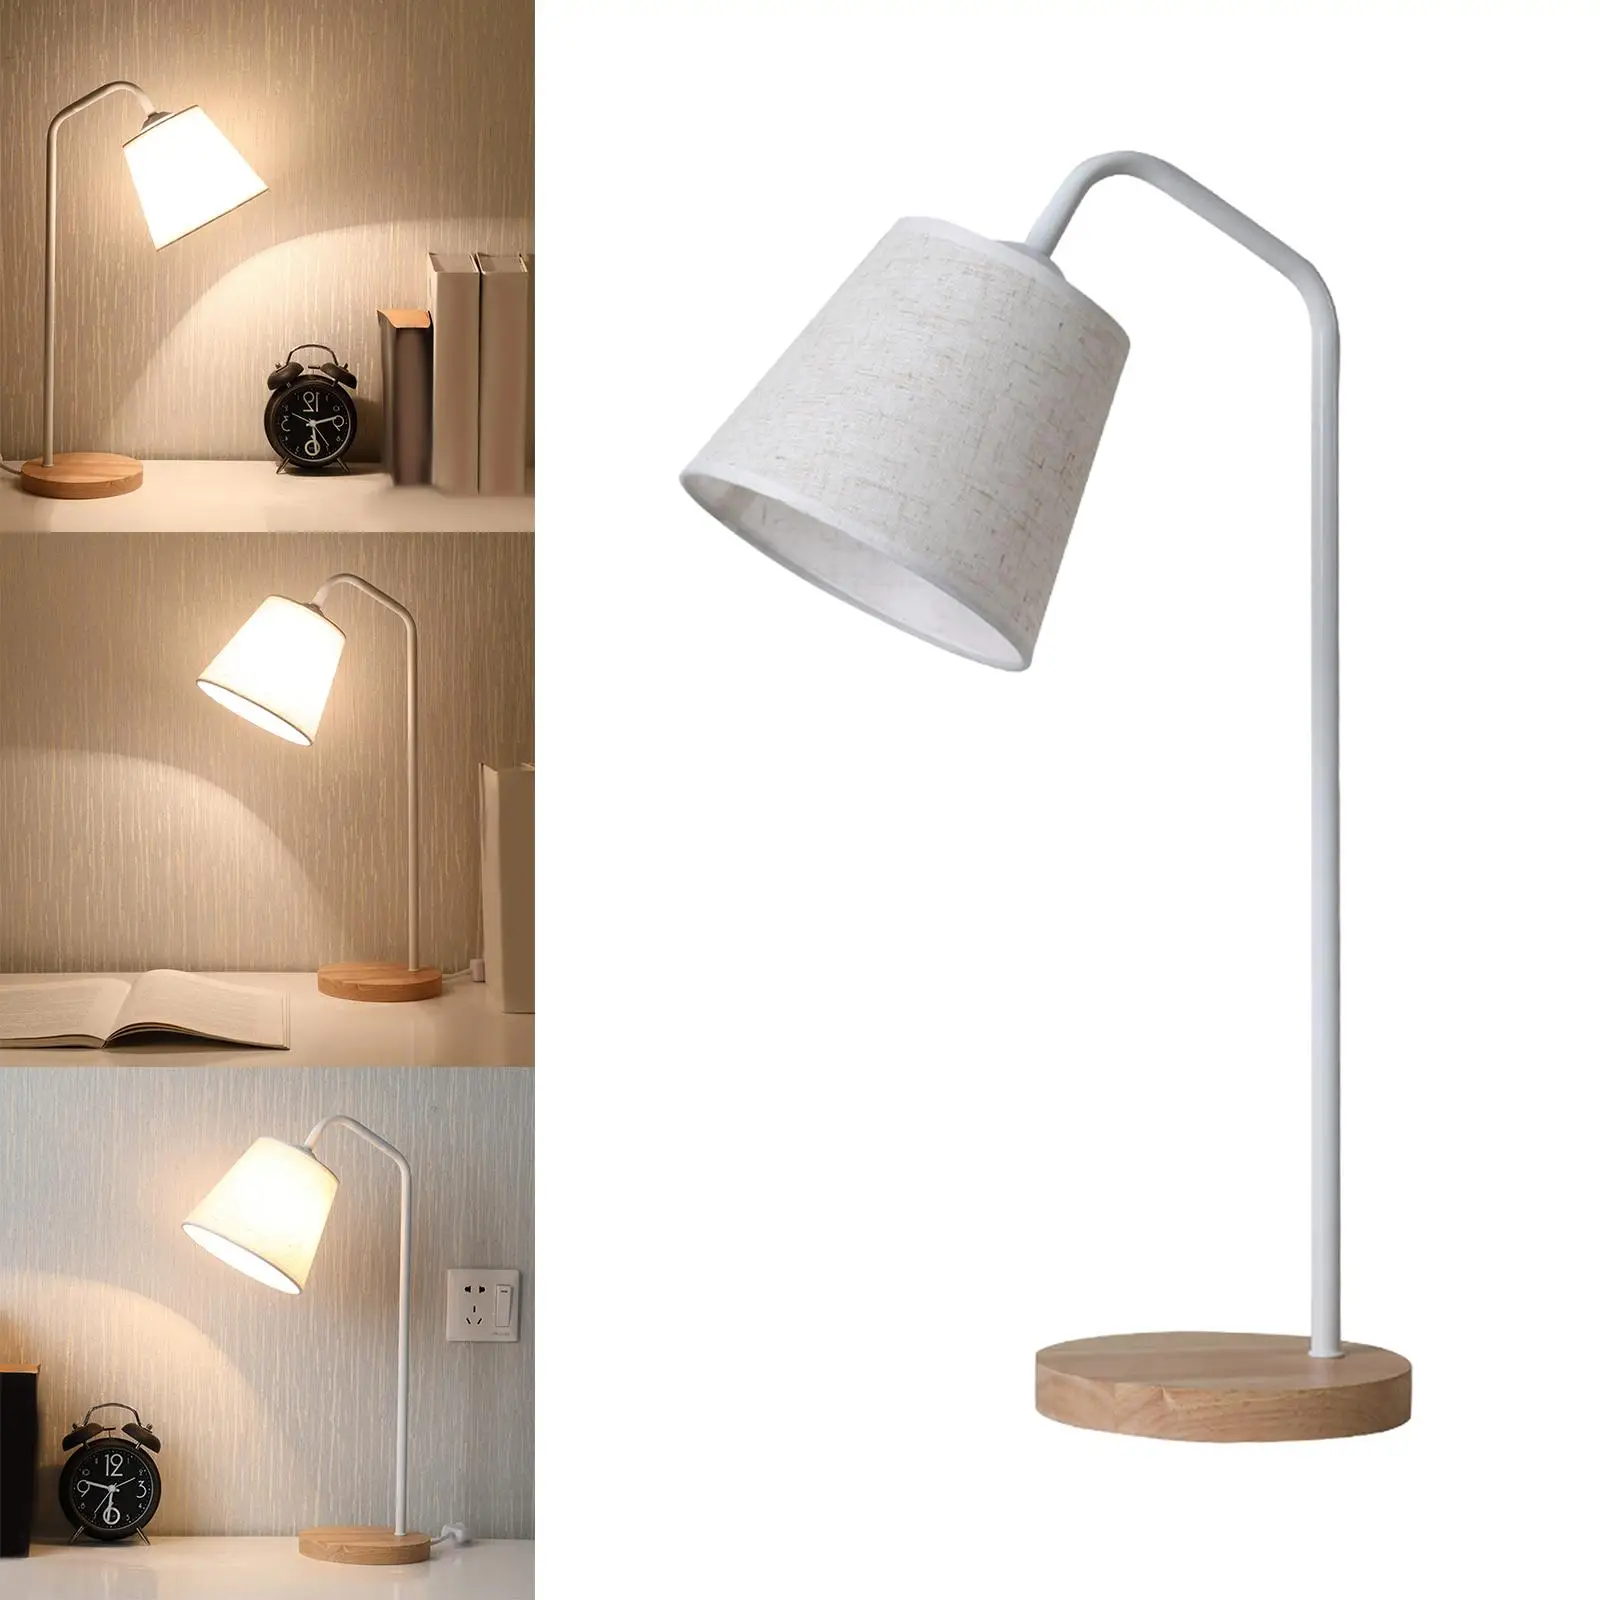 Nordic Style Table Light USB Remote Control NightStand LED Study for Reading in Bed Headboard Bars Dorm Room Living Room